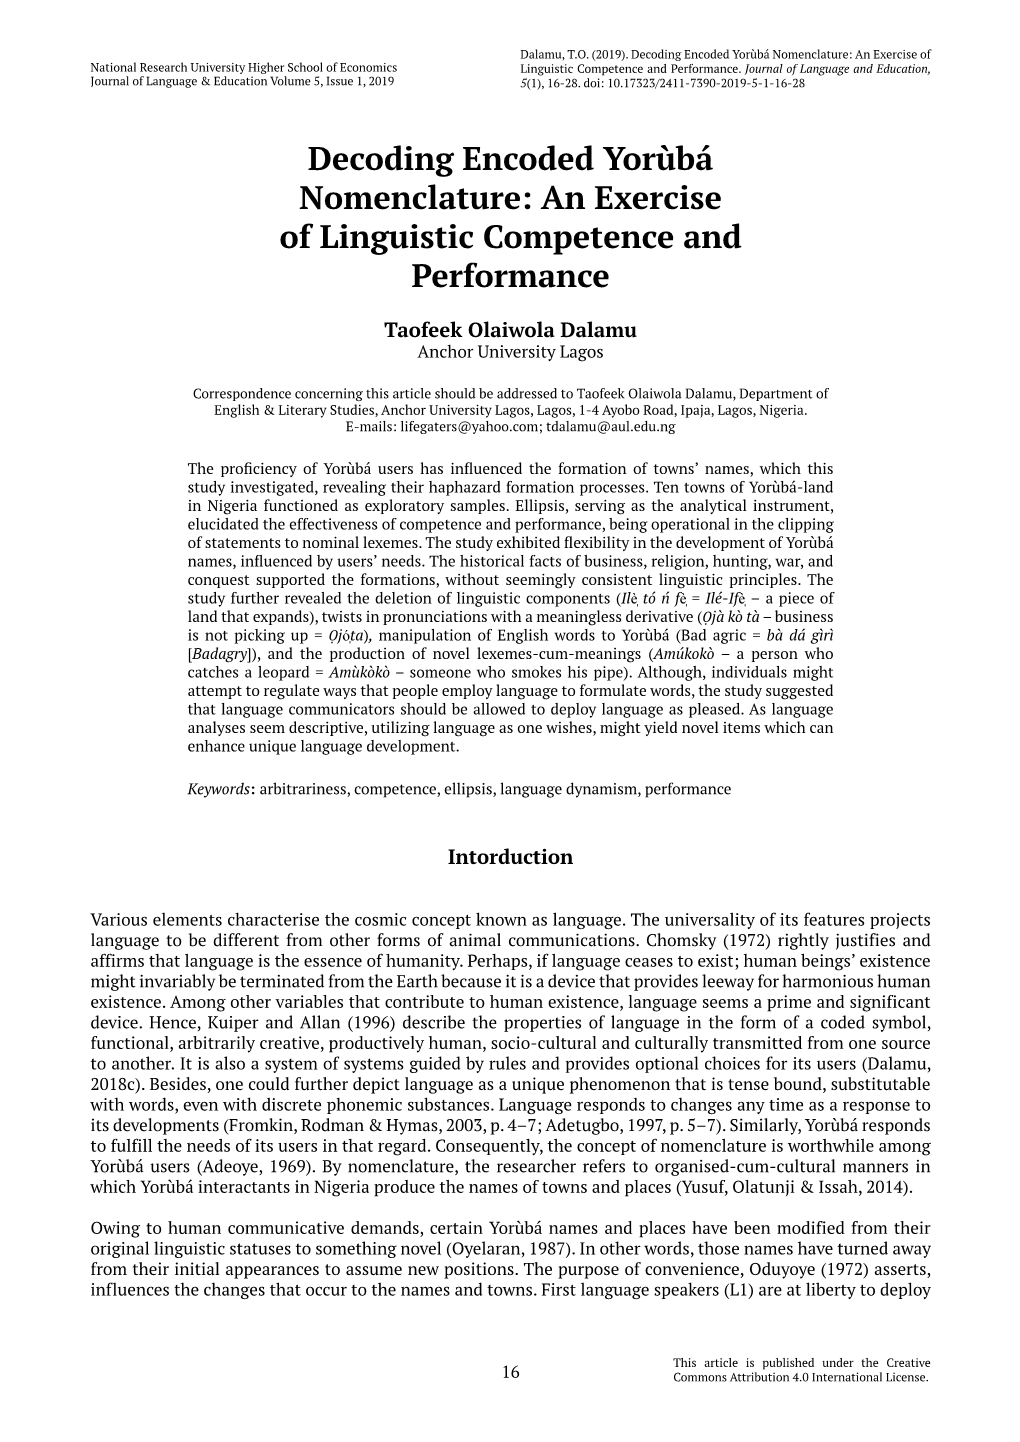 Decoding Encoded Yorùbá Nomenclature: an Exercise of National Research University Higher School of Economics Linguistic Competence and Performance